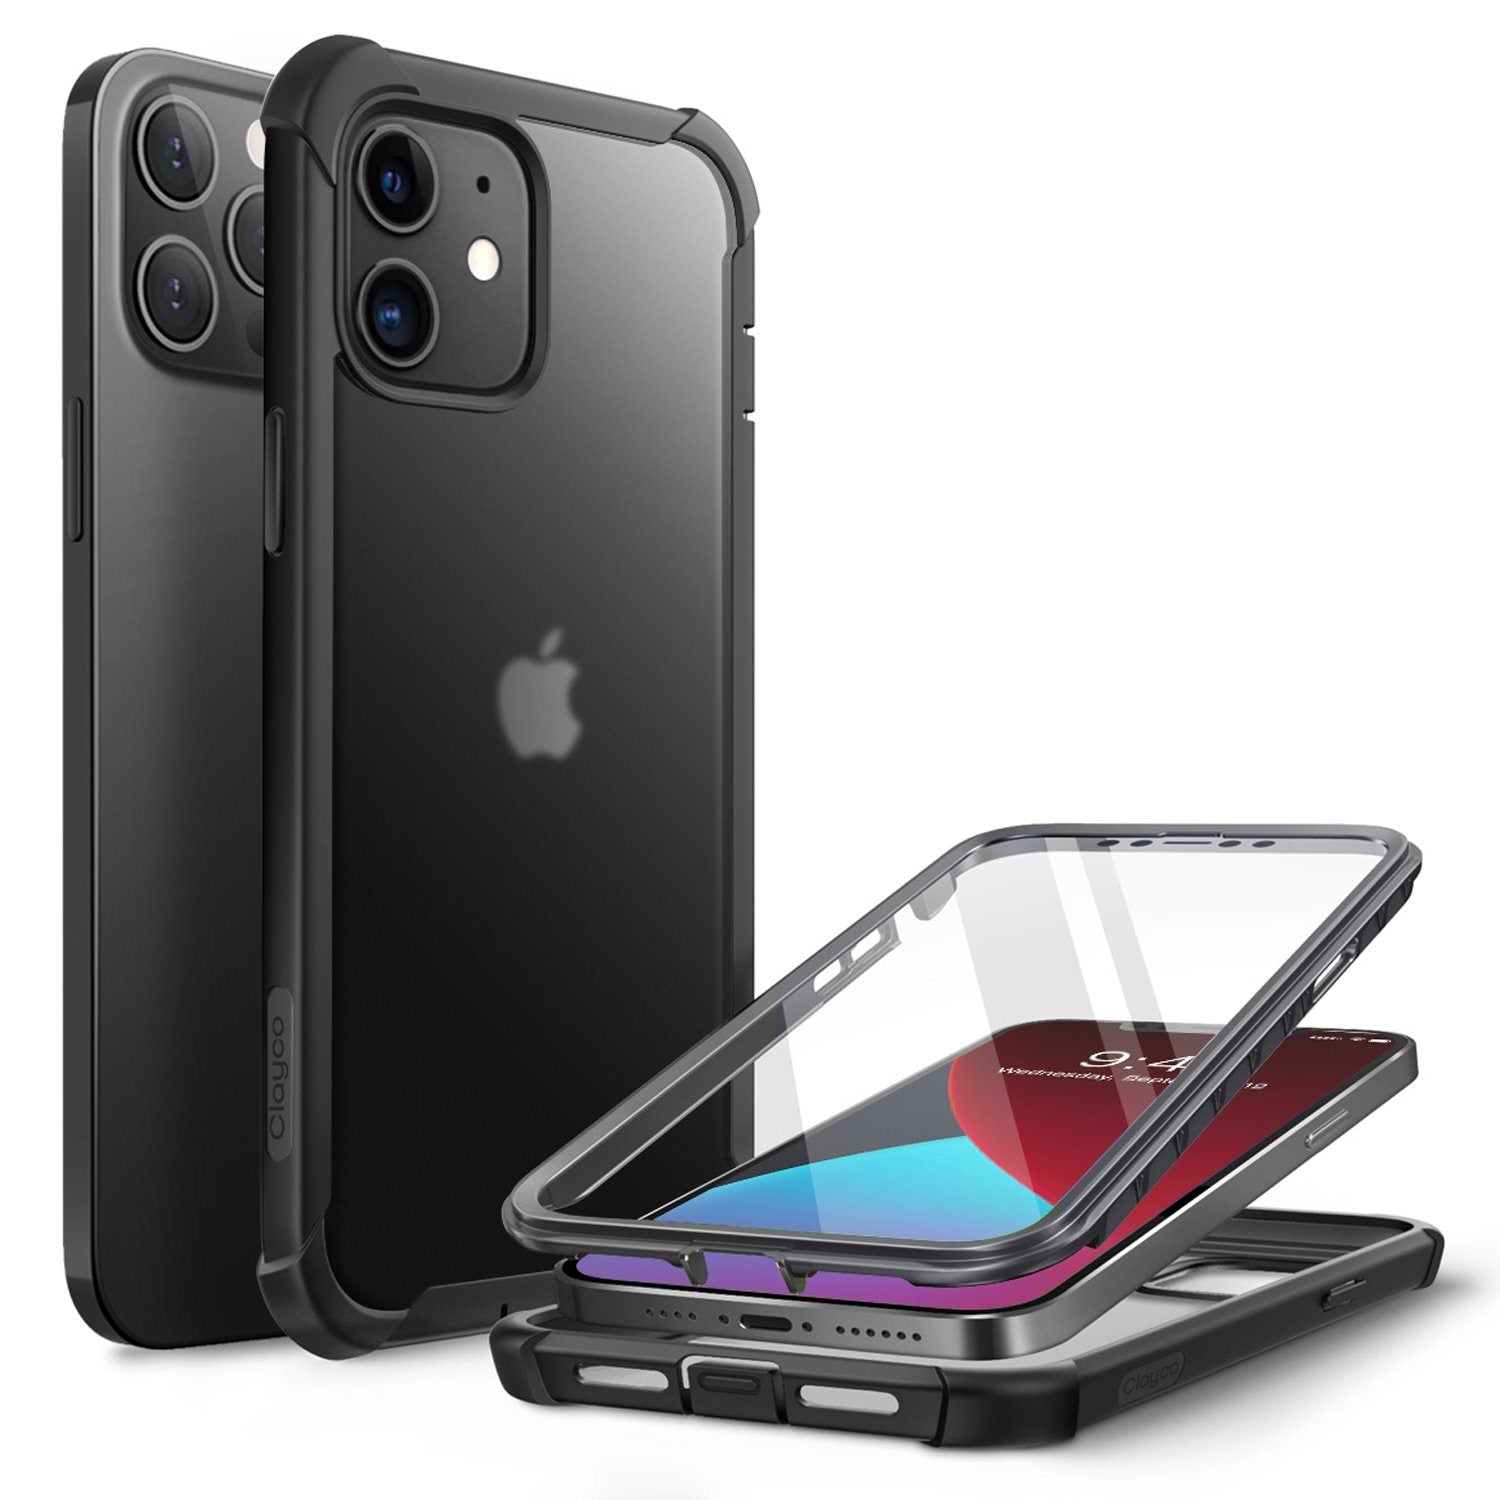 Clayco Forza Series Case for iPhone 12/12 Pro 6.1"(2020) with Built-in Screen Protector, Black Default Clayco 